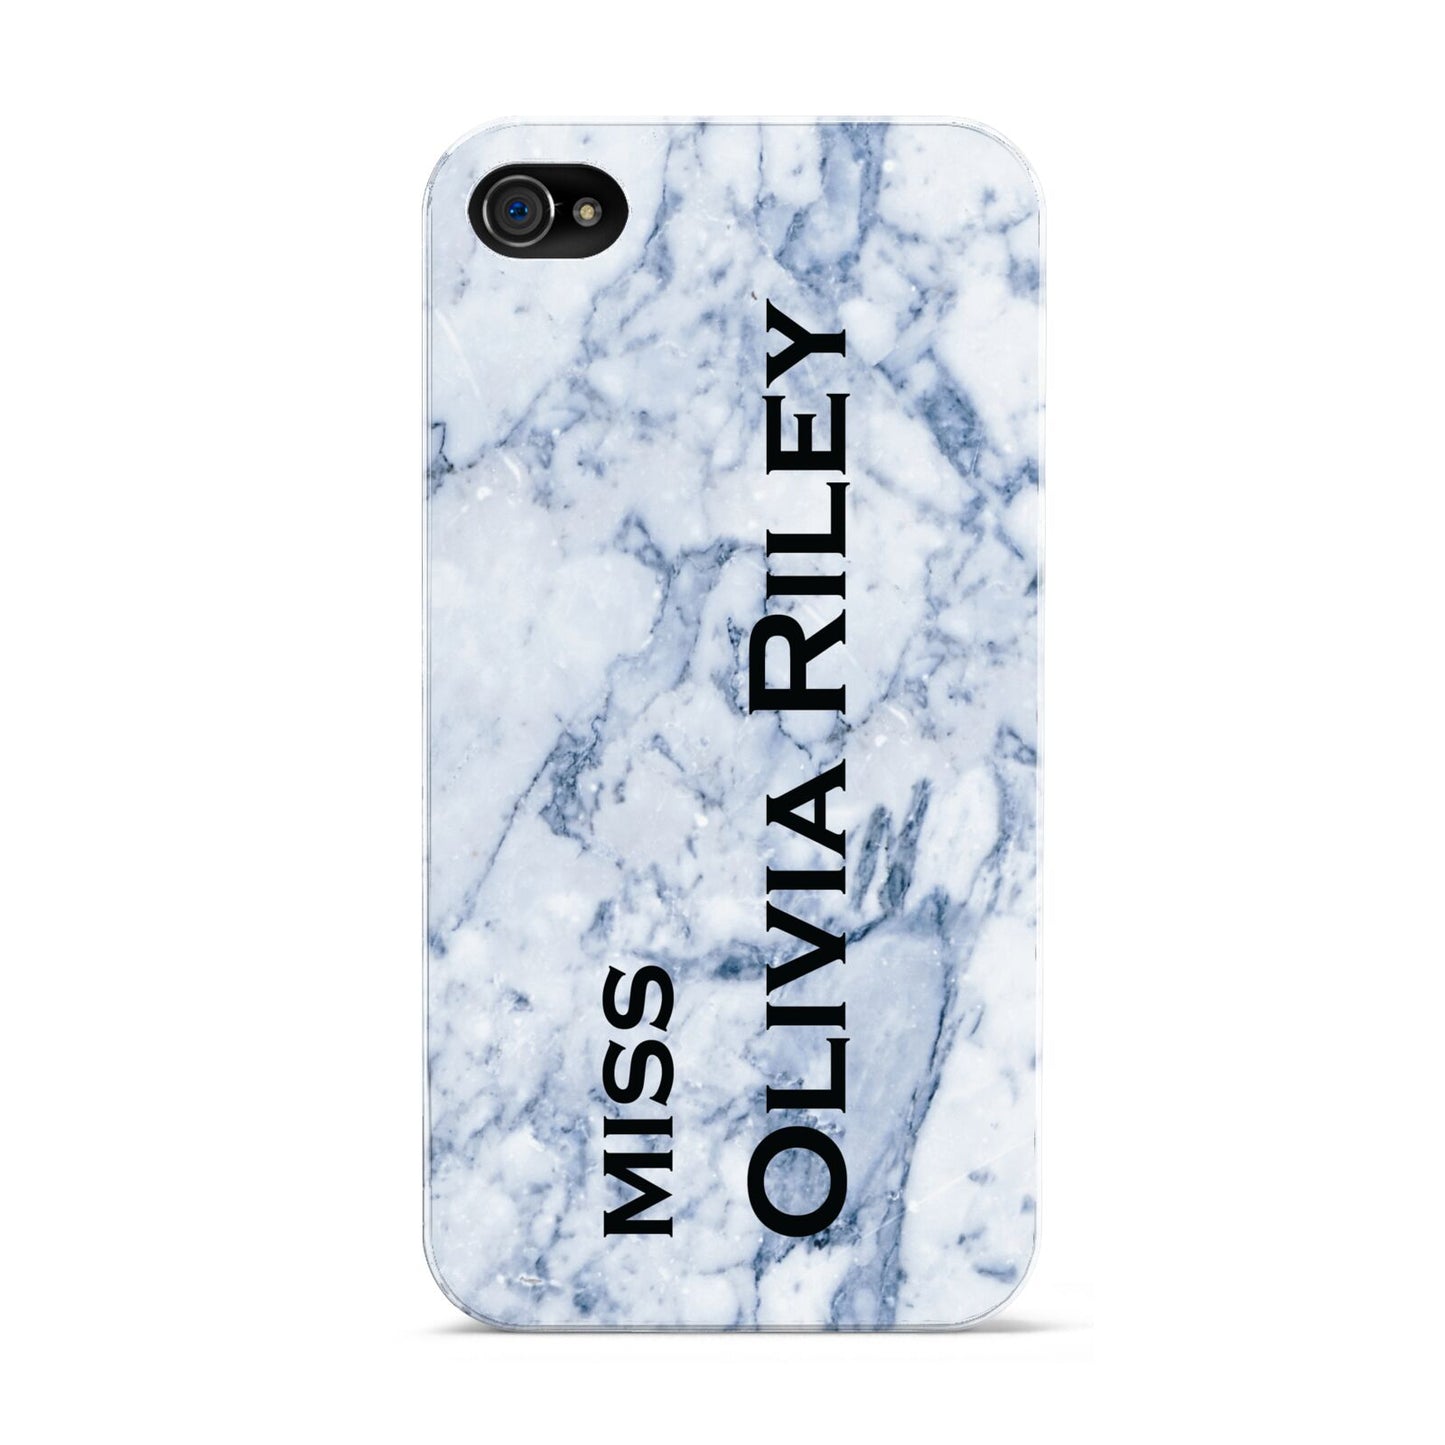 Full Name Grey Marble Apple iPhone 4s Case